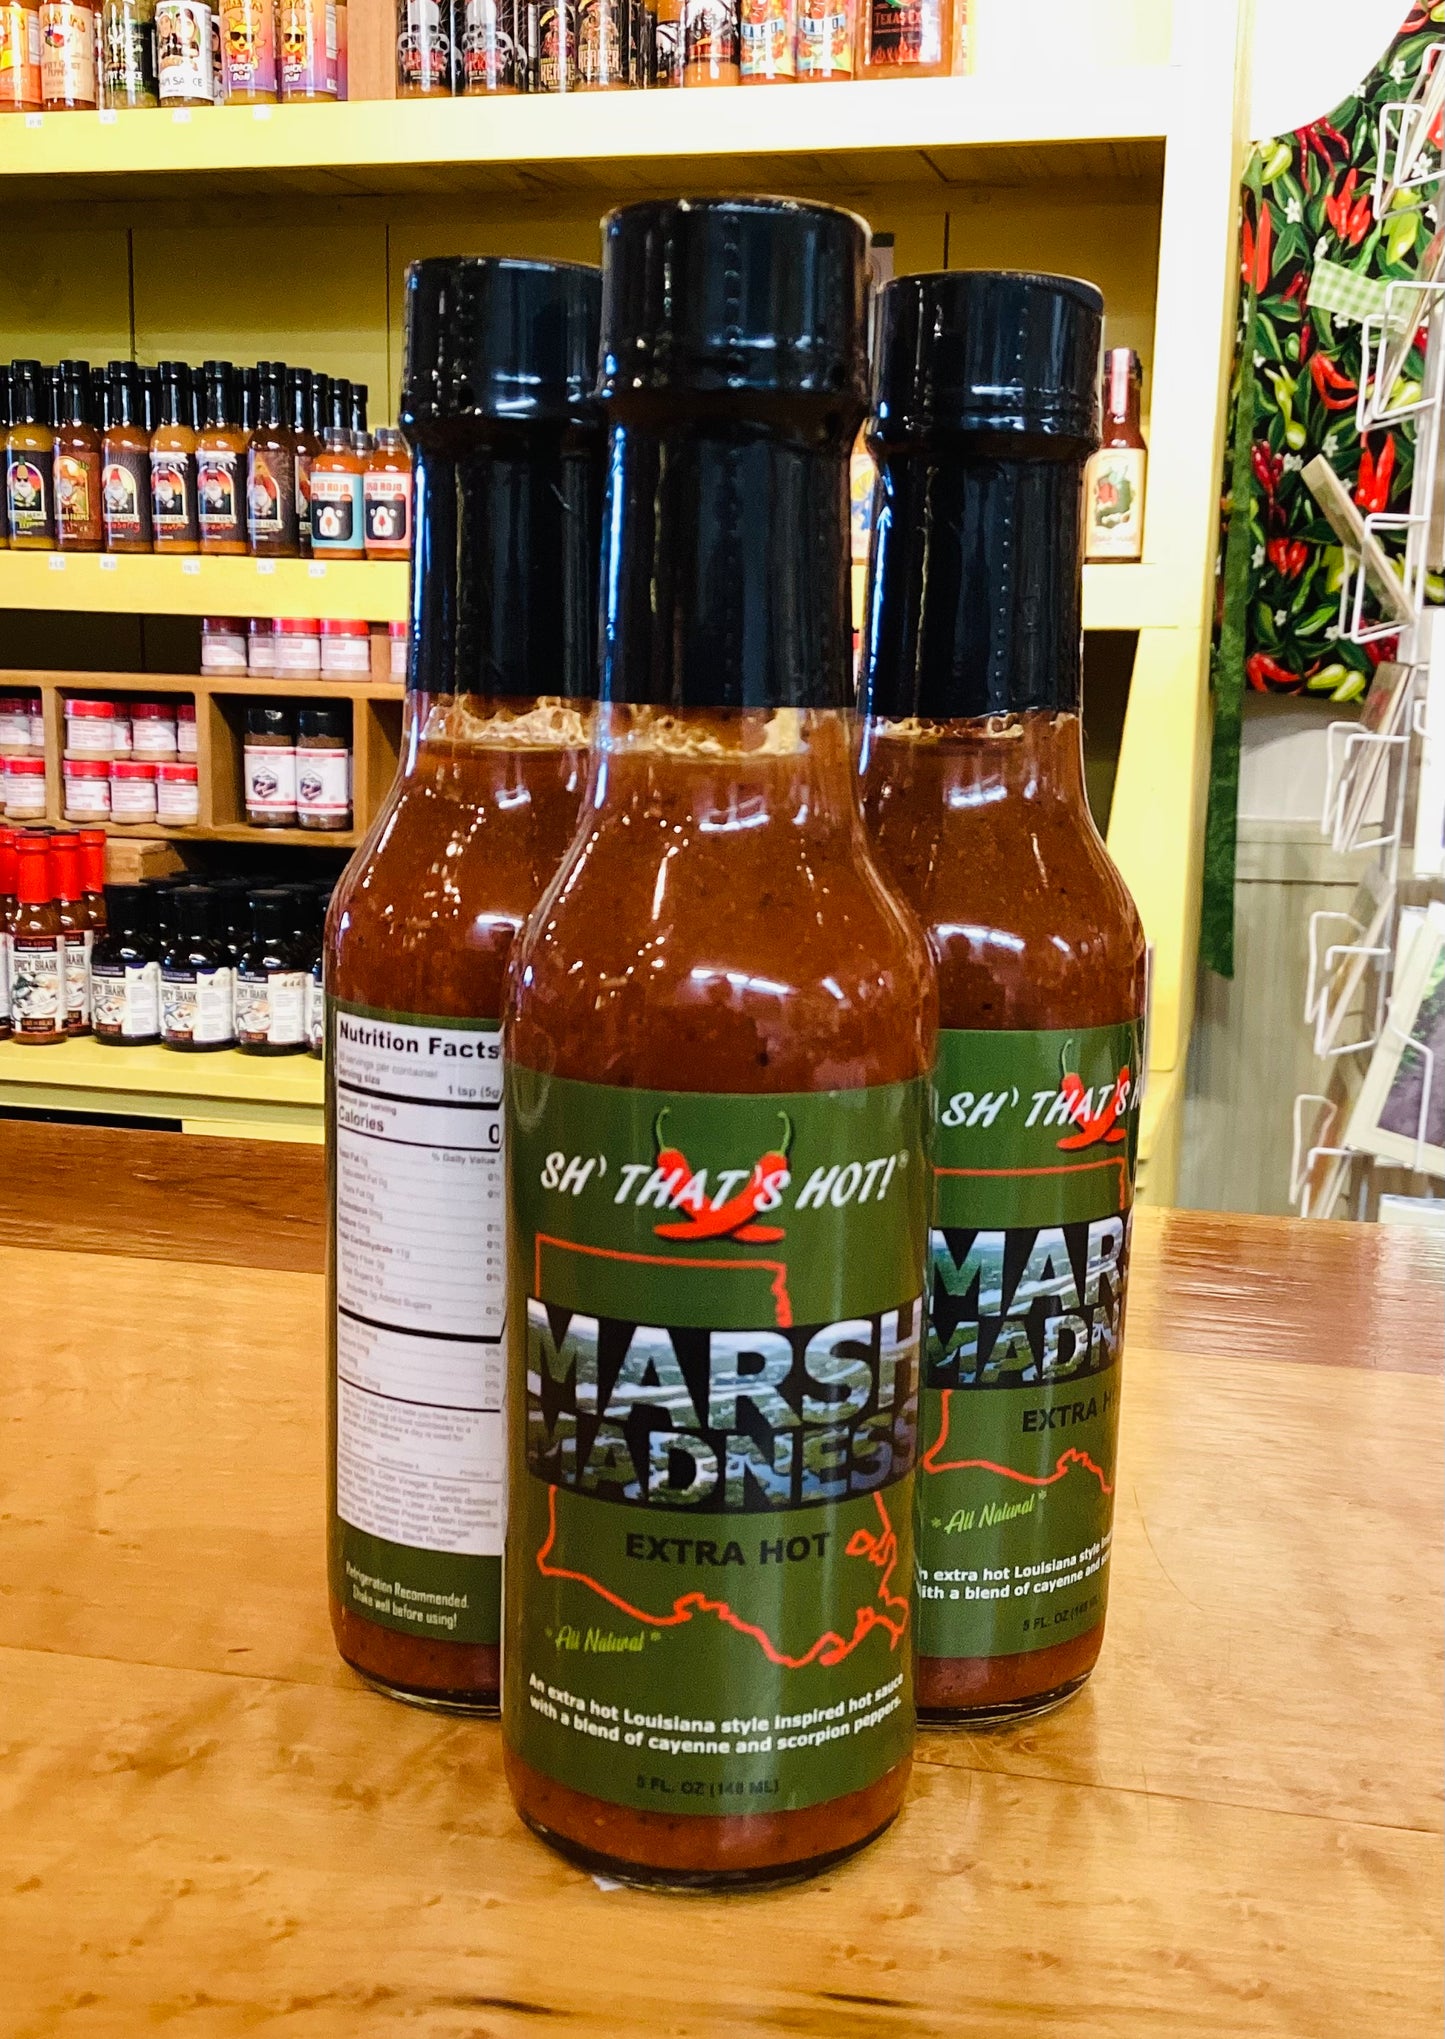 SH' THAT'S HOT Marsh Madness Extra Hot Hot Sauce 5 oz